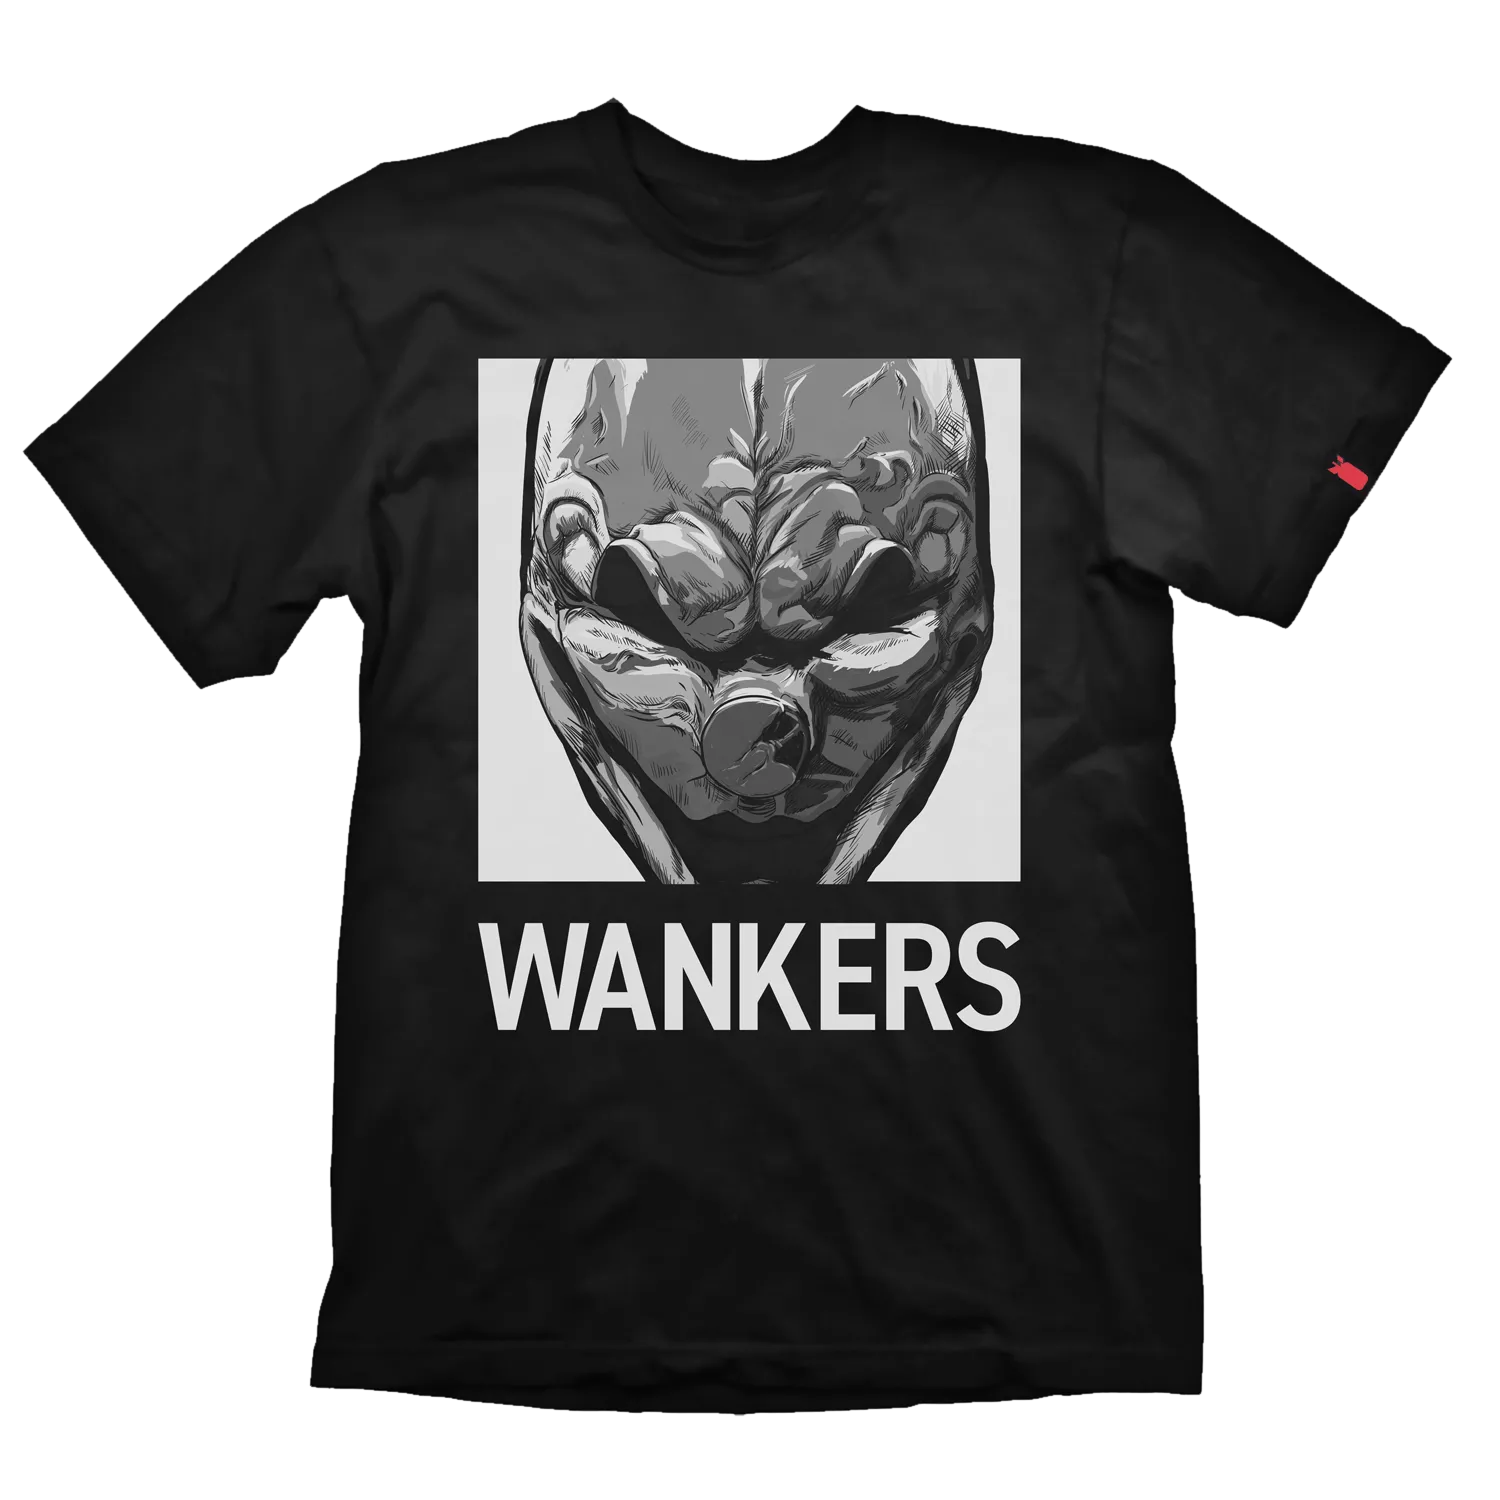 Payday 2 T-Shirt "Wankers"